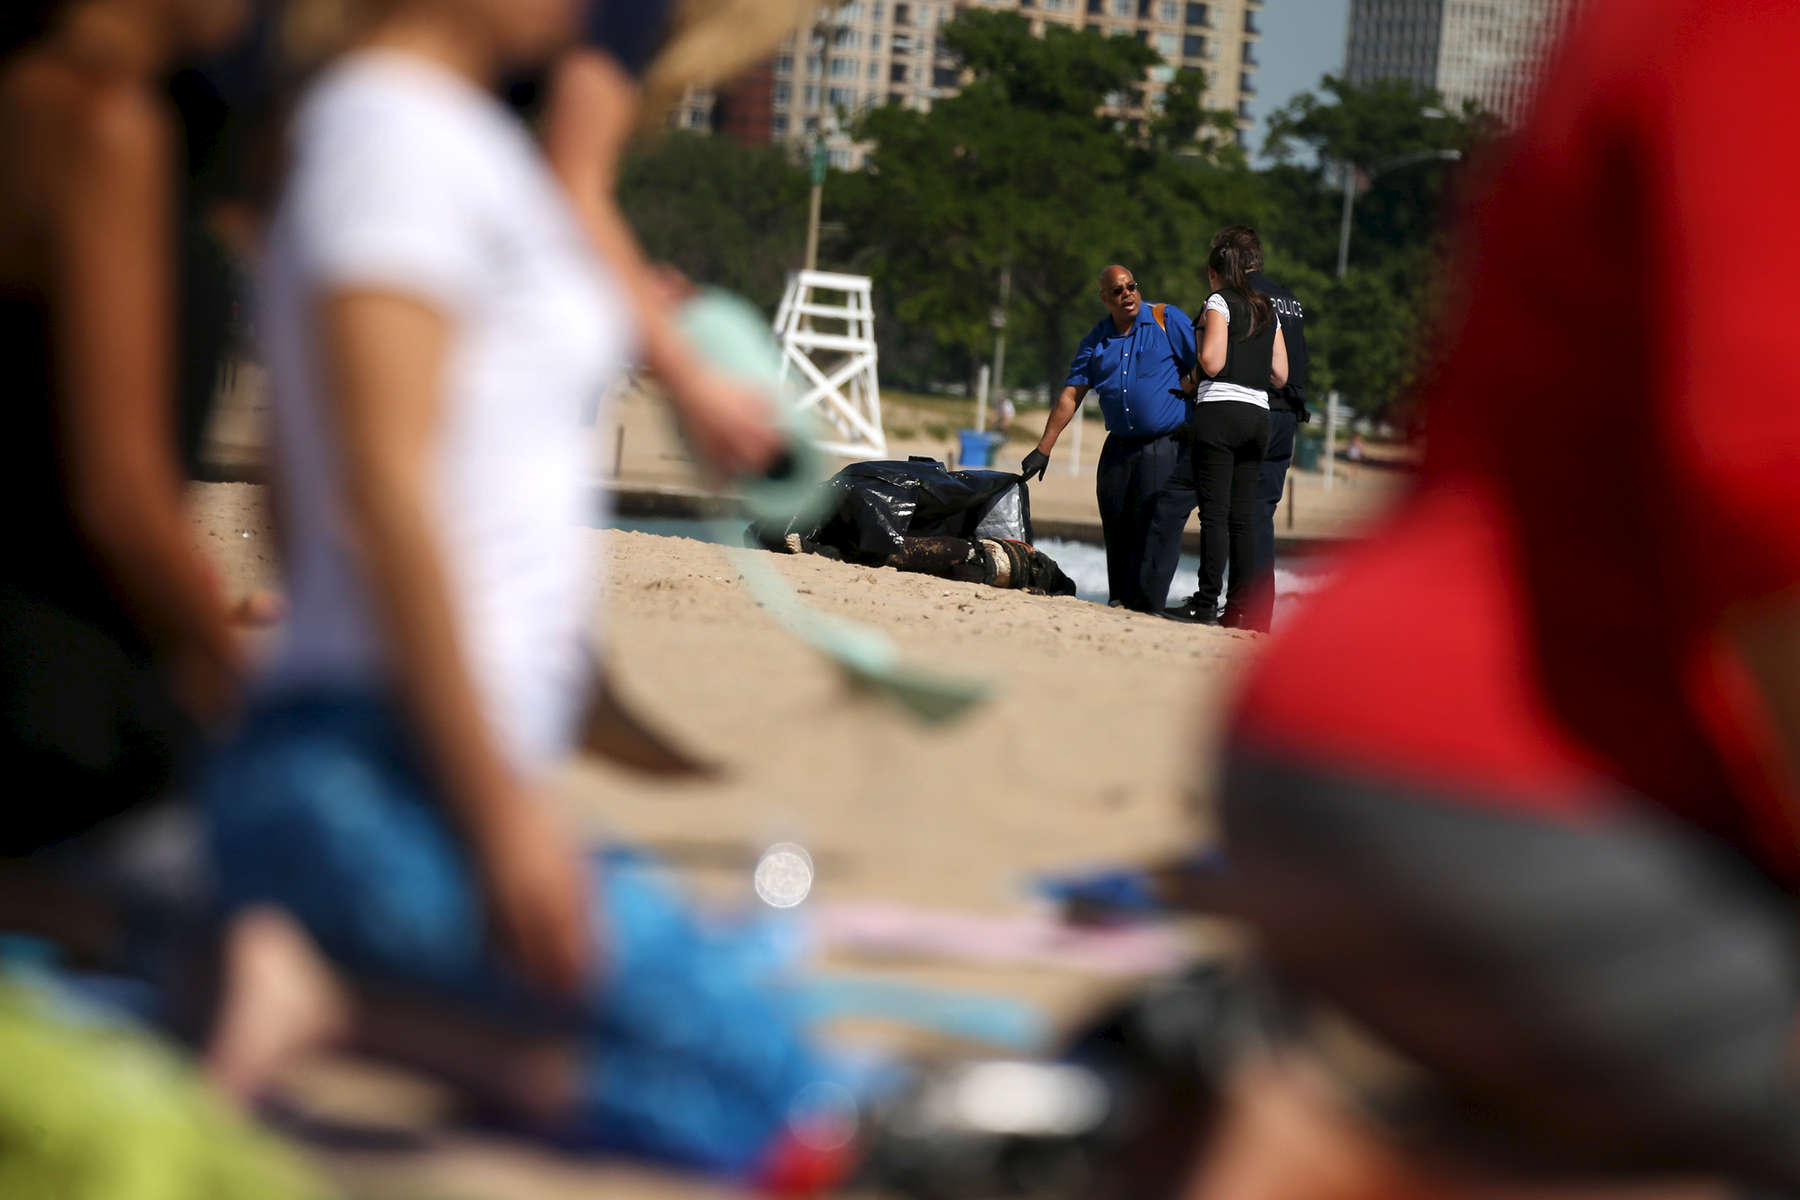 Participants of a morning beach yoga class practiced their poses as police investigated the scene nearby where a body was discovered at North Avenue Beach in Chicago.